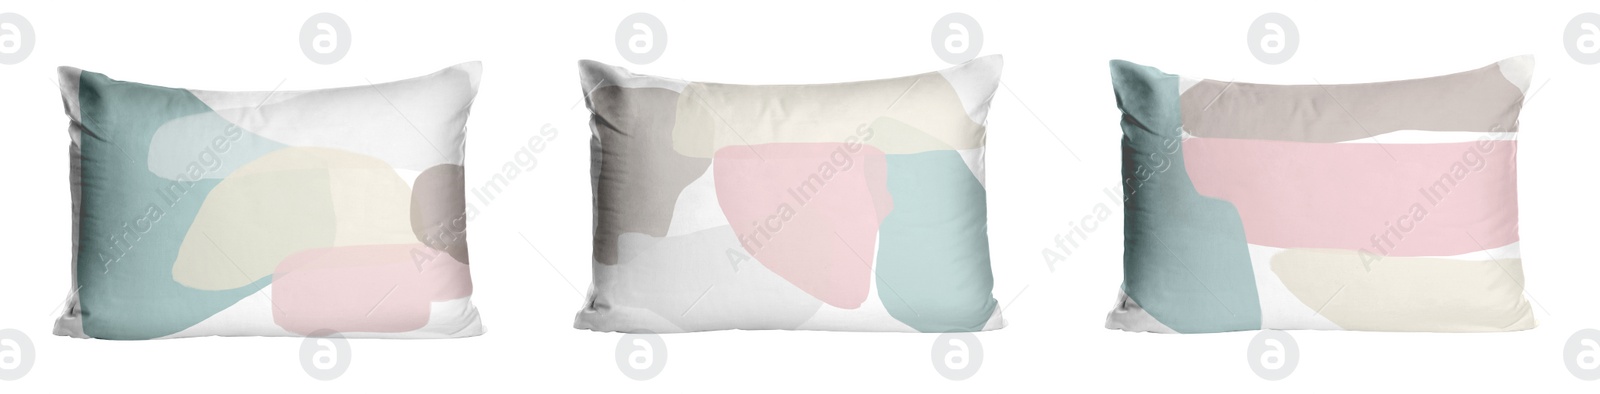 Image of Soft pillows with stylish prints isolated on white